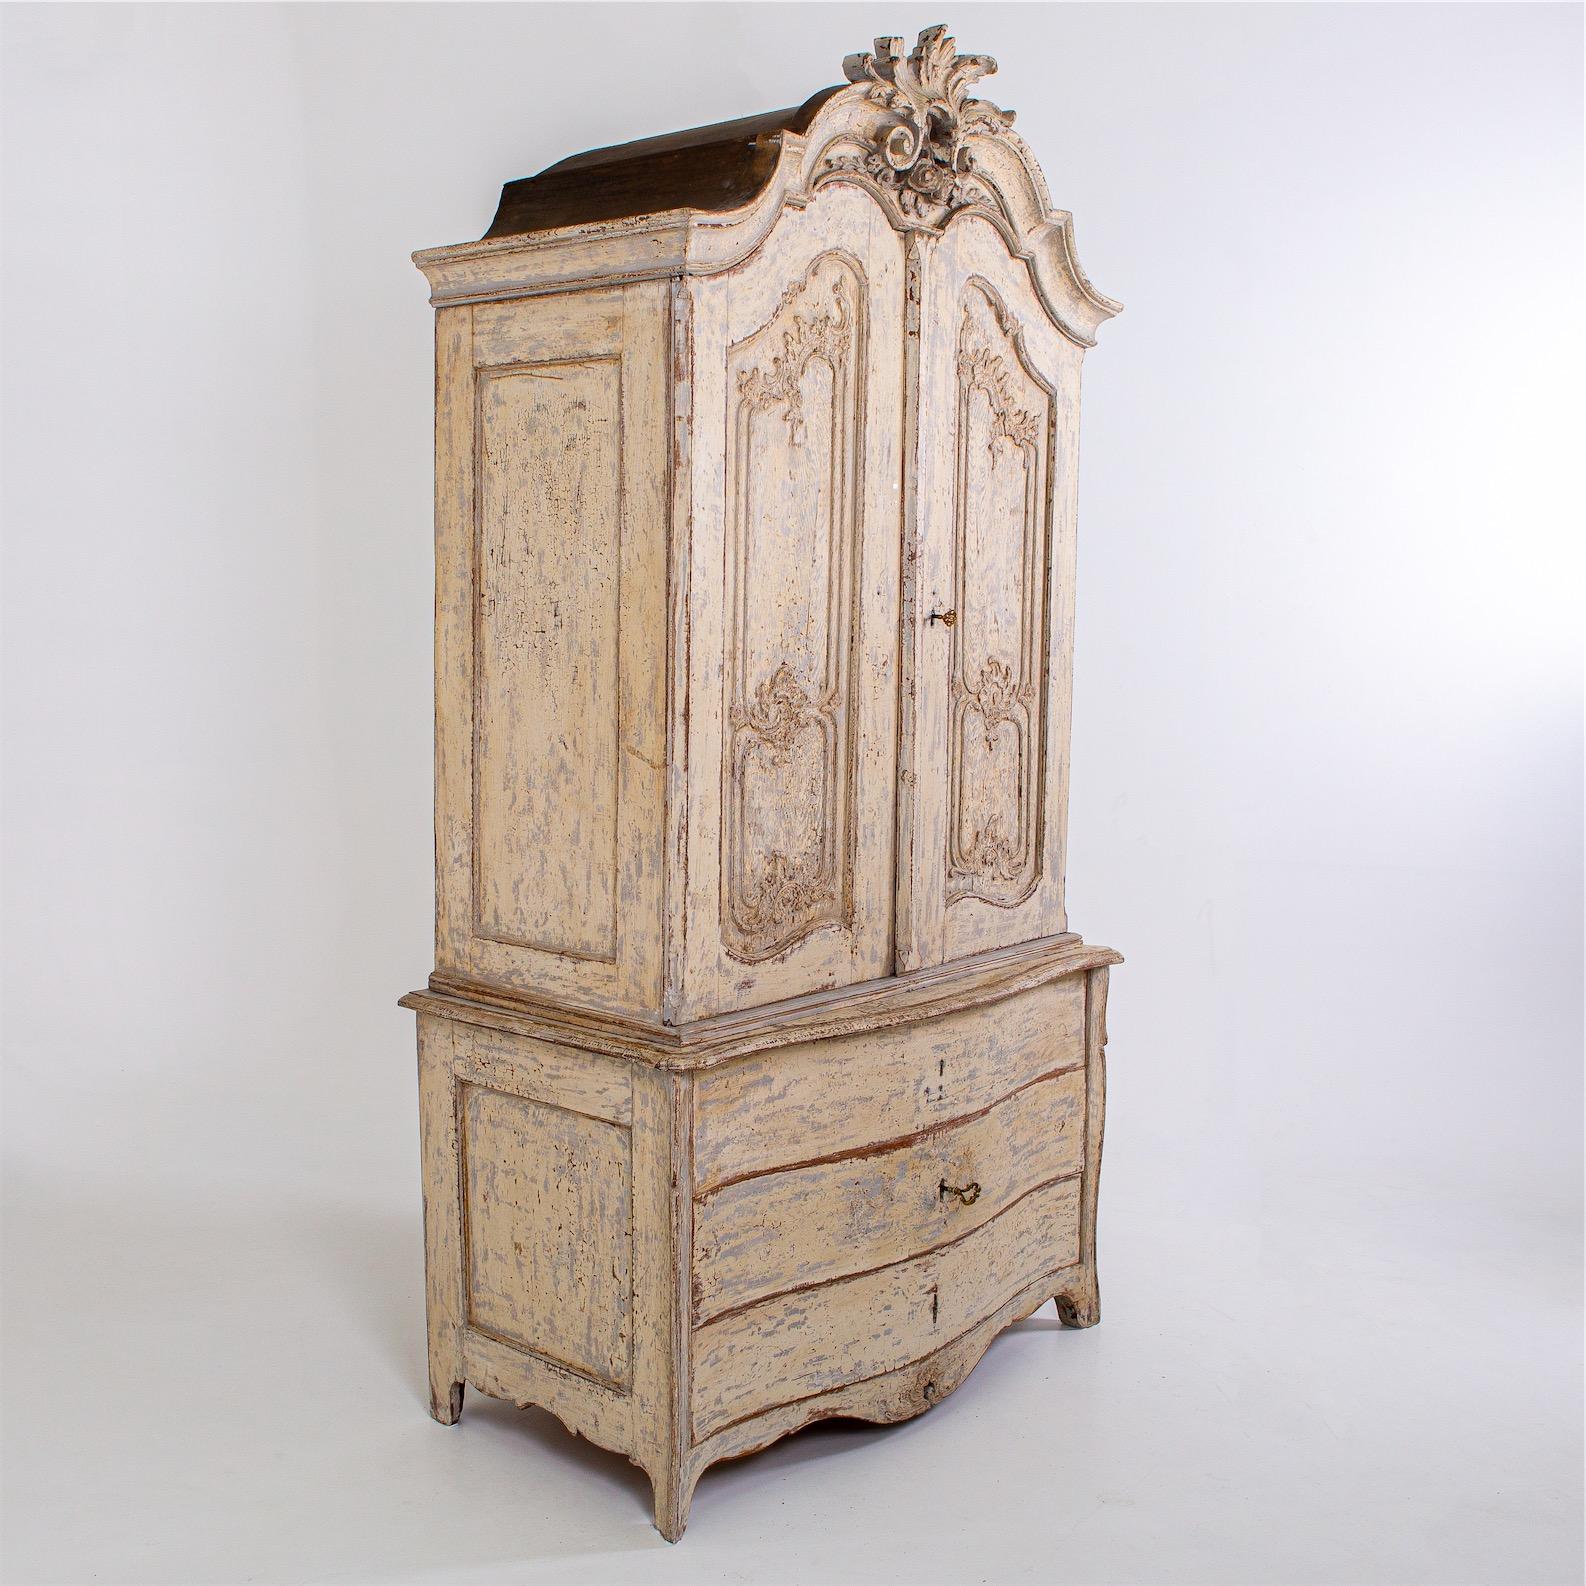 Large baroque cabinet with three-drawer commode base on a curved frame and two-door cabinet with crowning carved volute decoration and curved fillings. The setting is beige and was subsequently patinated with an antique finish.